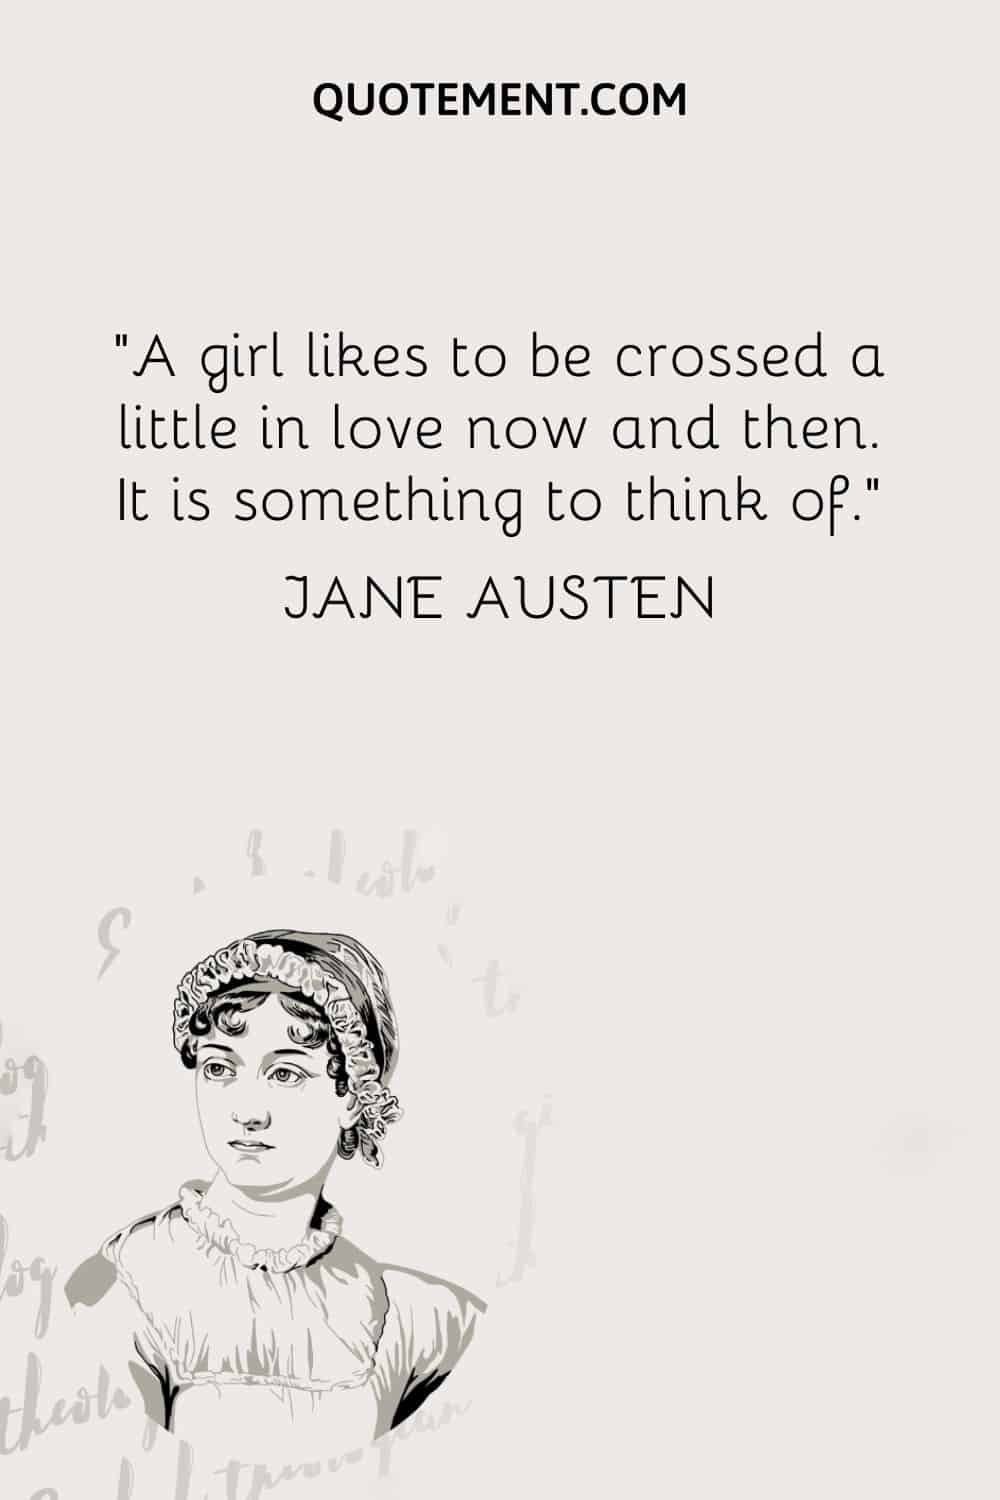 A girl likes to be crossed a little in love now and then. It is something to think of. — Jane Austen